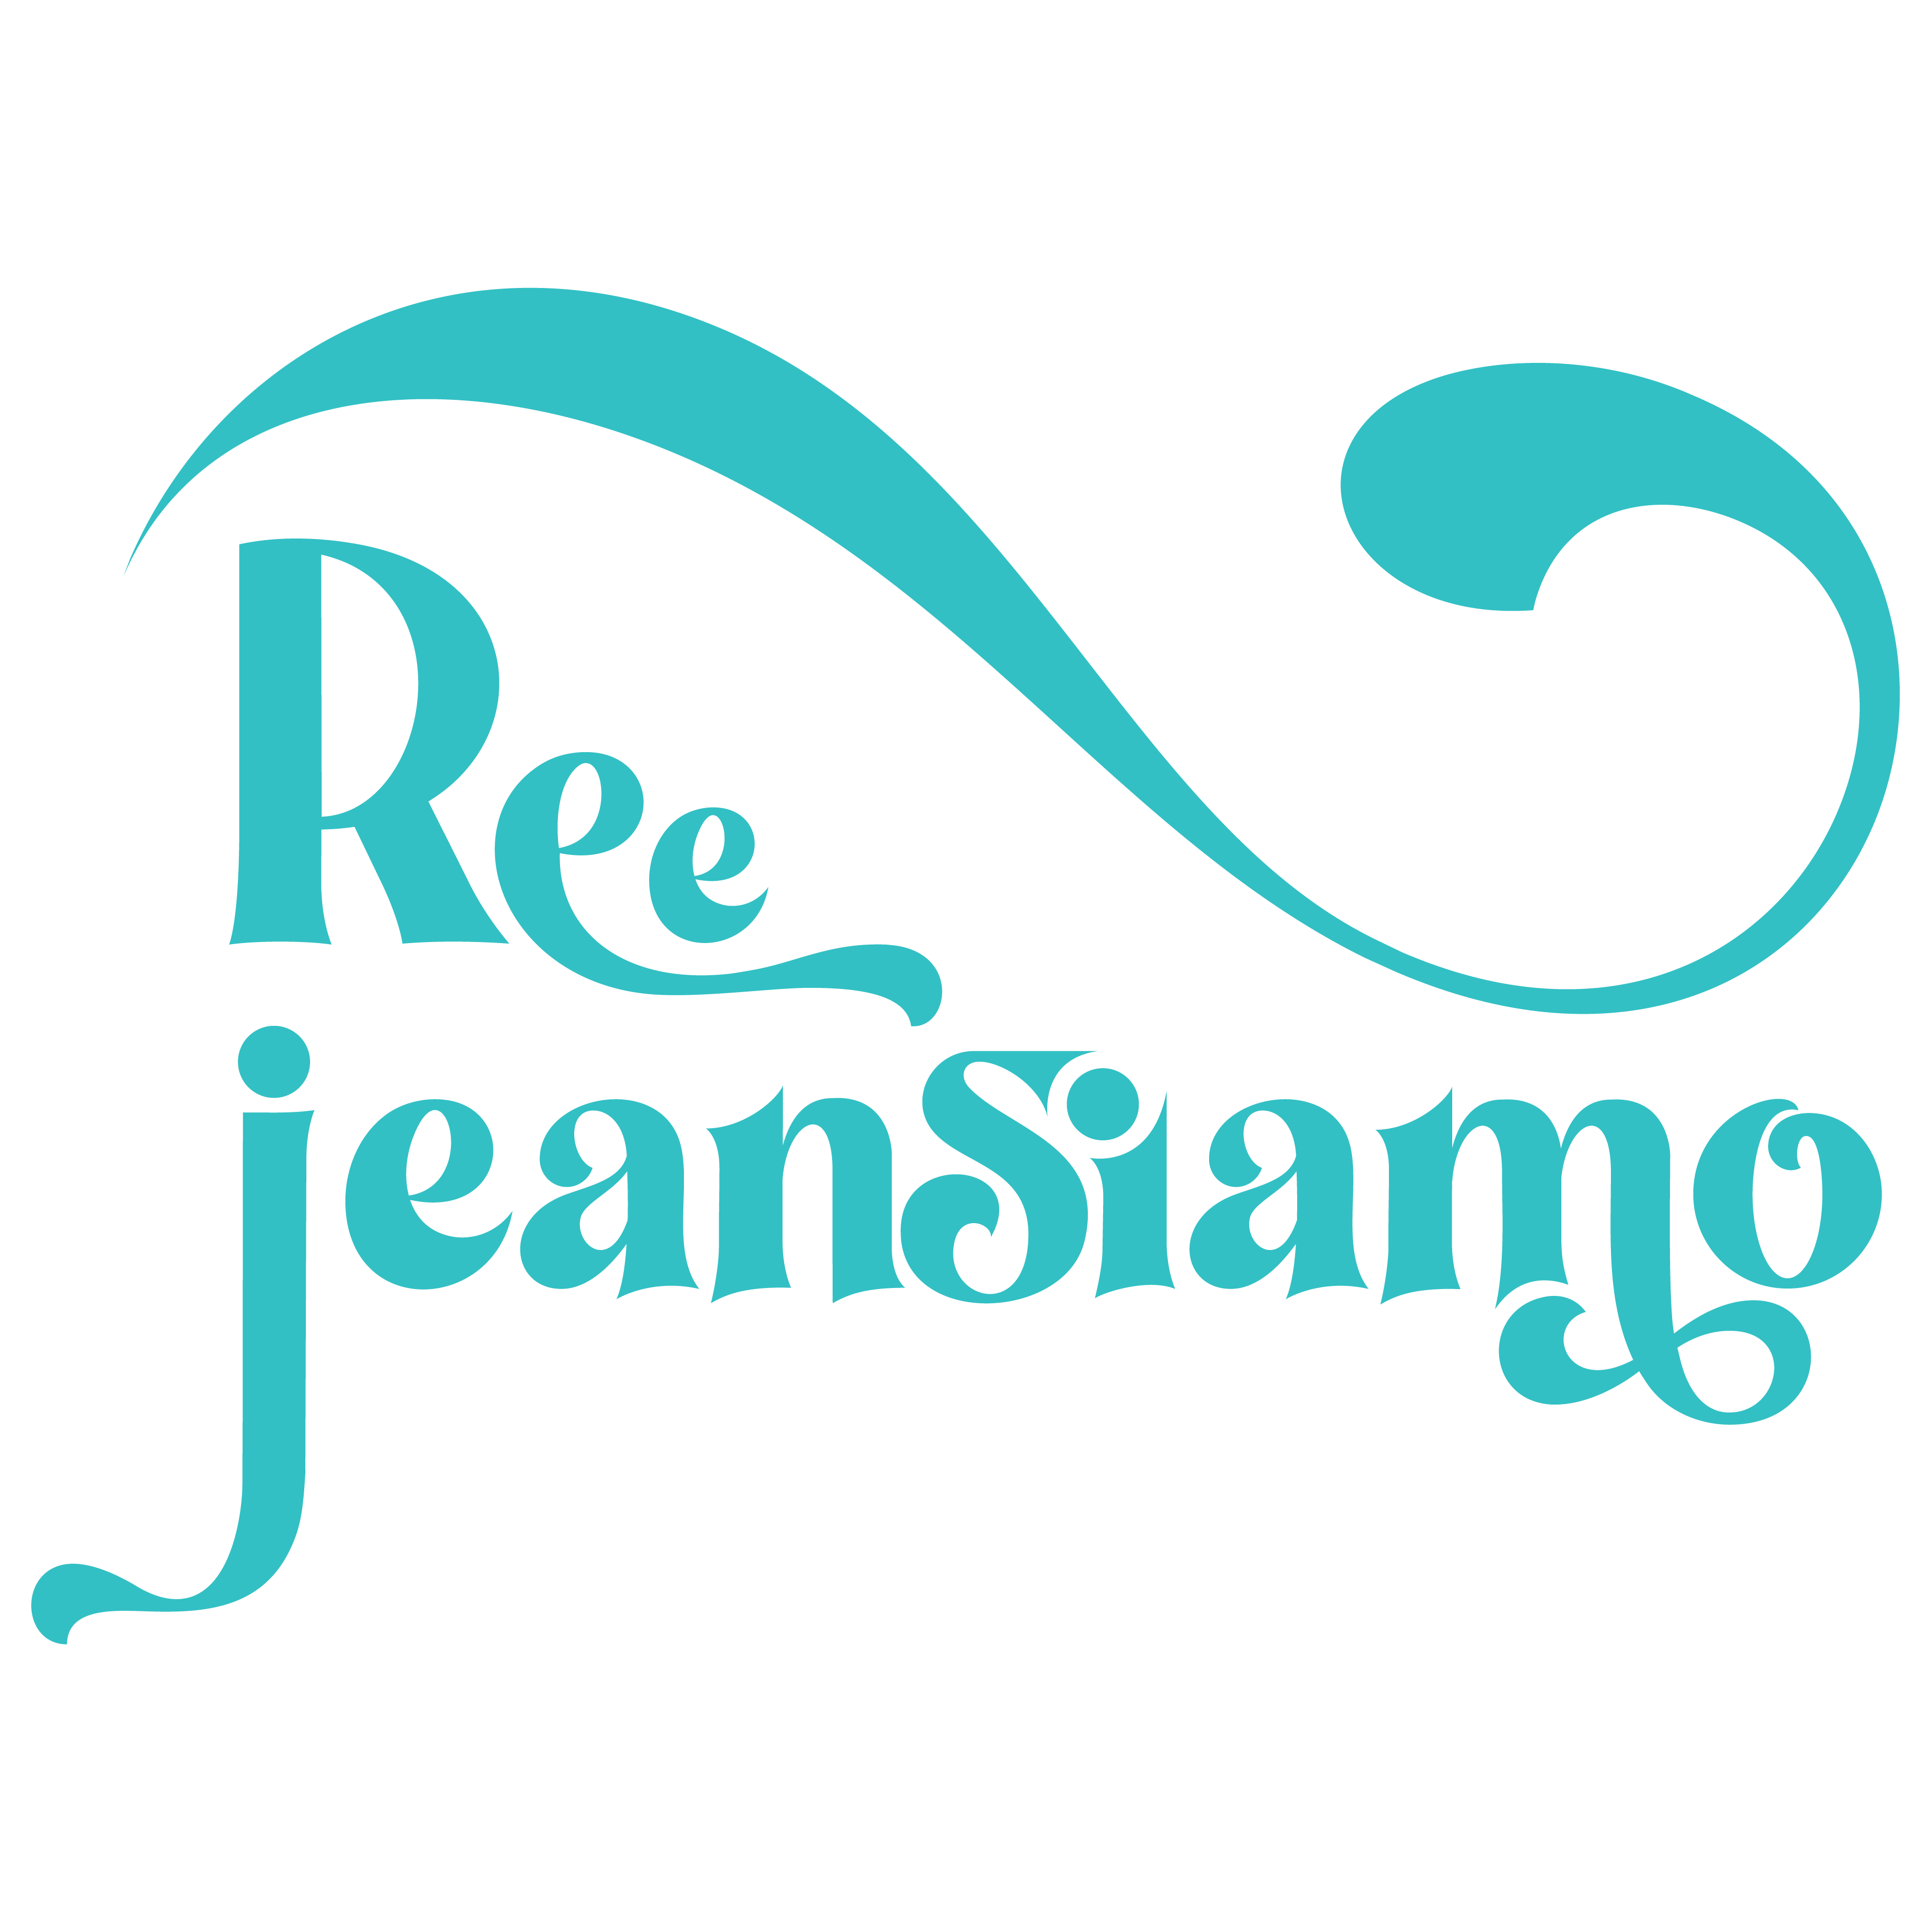 Reejeansiamo - Denim Upcycling Made In Italy